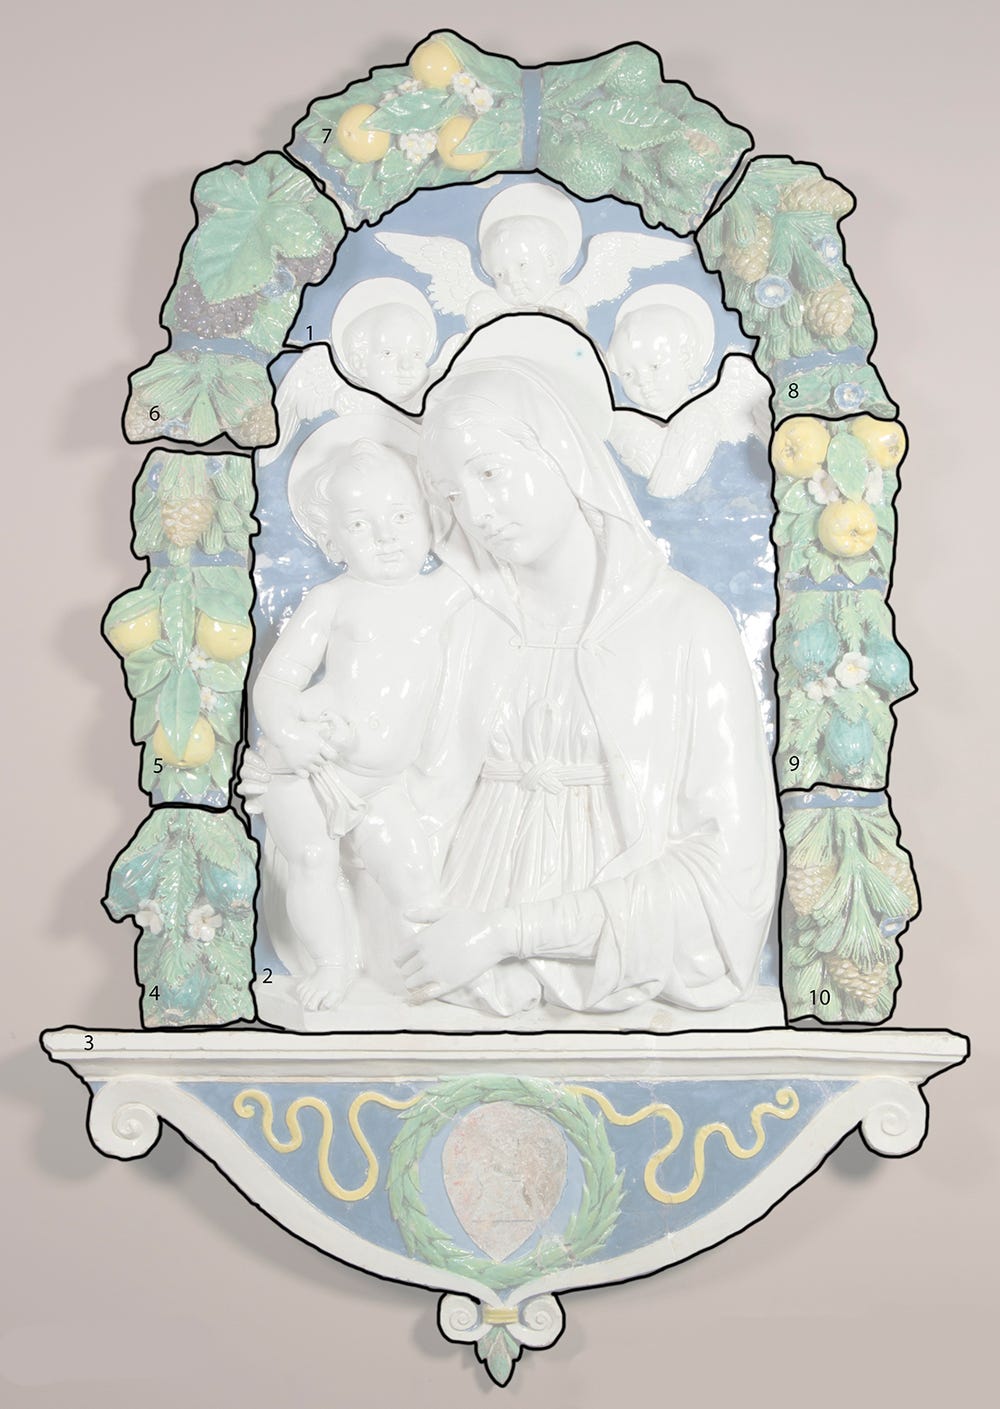 Faint Virgin Mary and Child relief with drawn black overlay dividing piece into sections